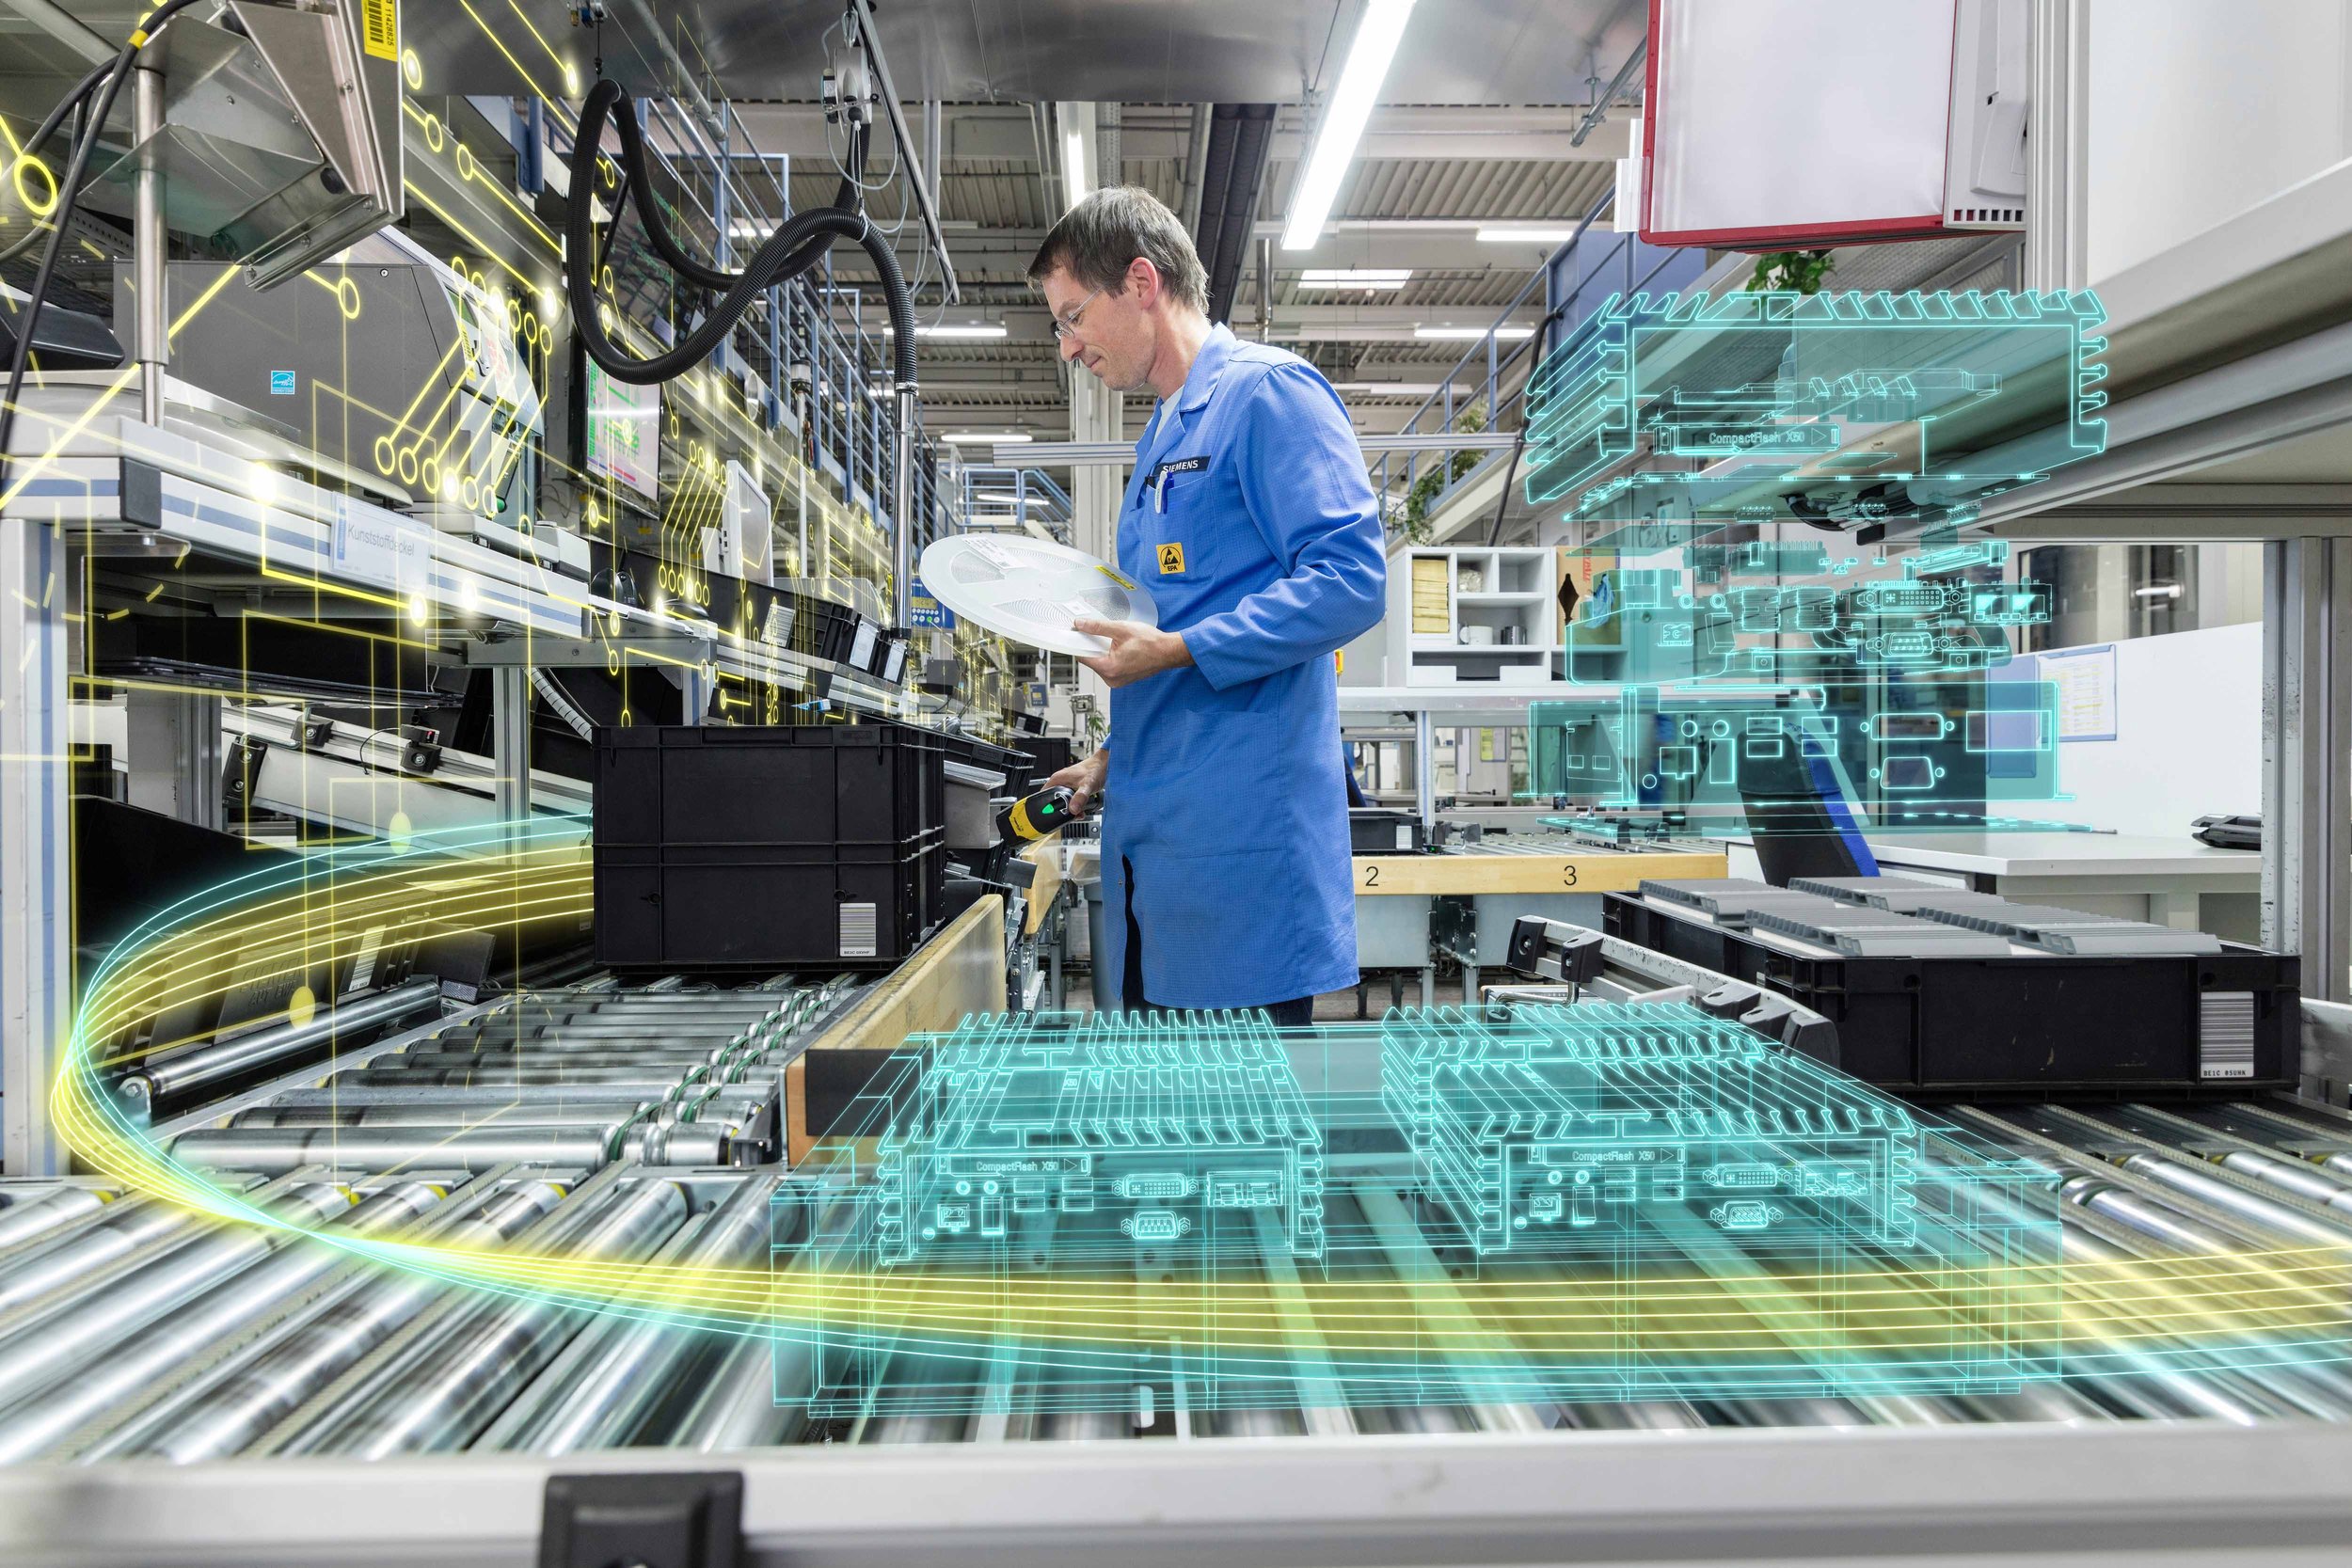 Digital Tools in manufacturing are crucial to meet the growing demands of the modern world. 